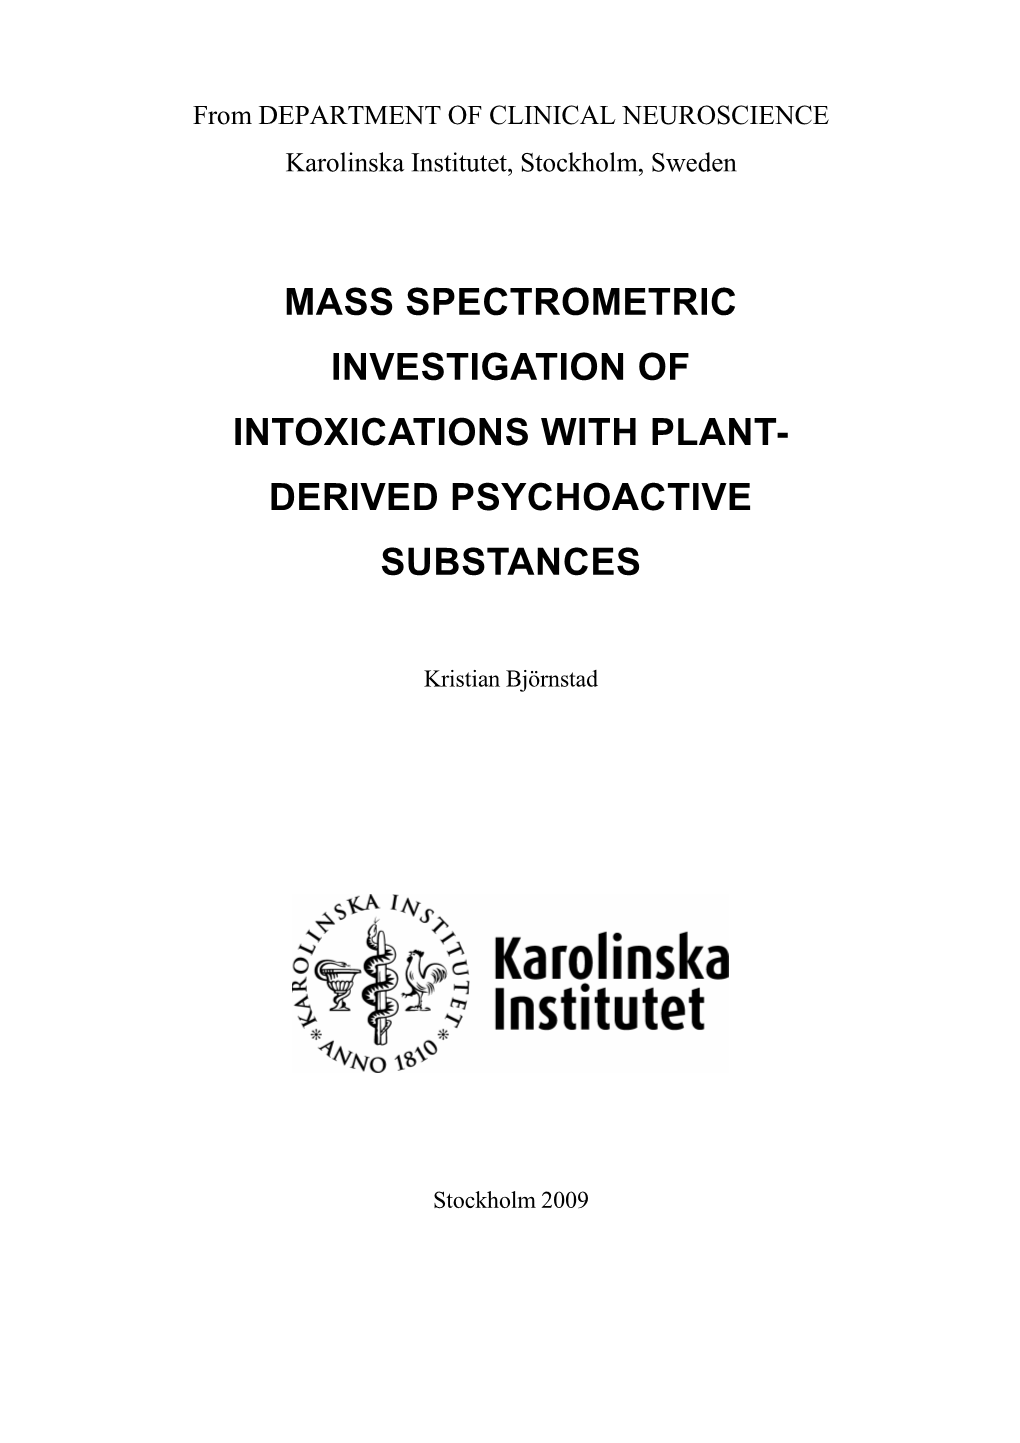 Mass Spectrometric Investigation of Intoxications with Plant- Derived Psychoactive Substances